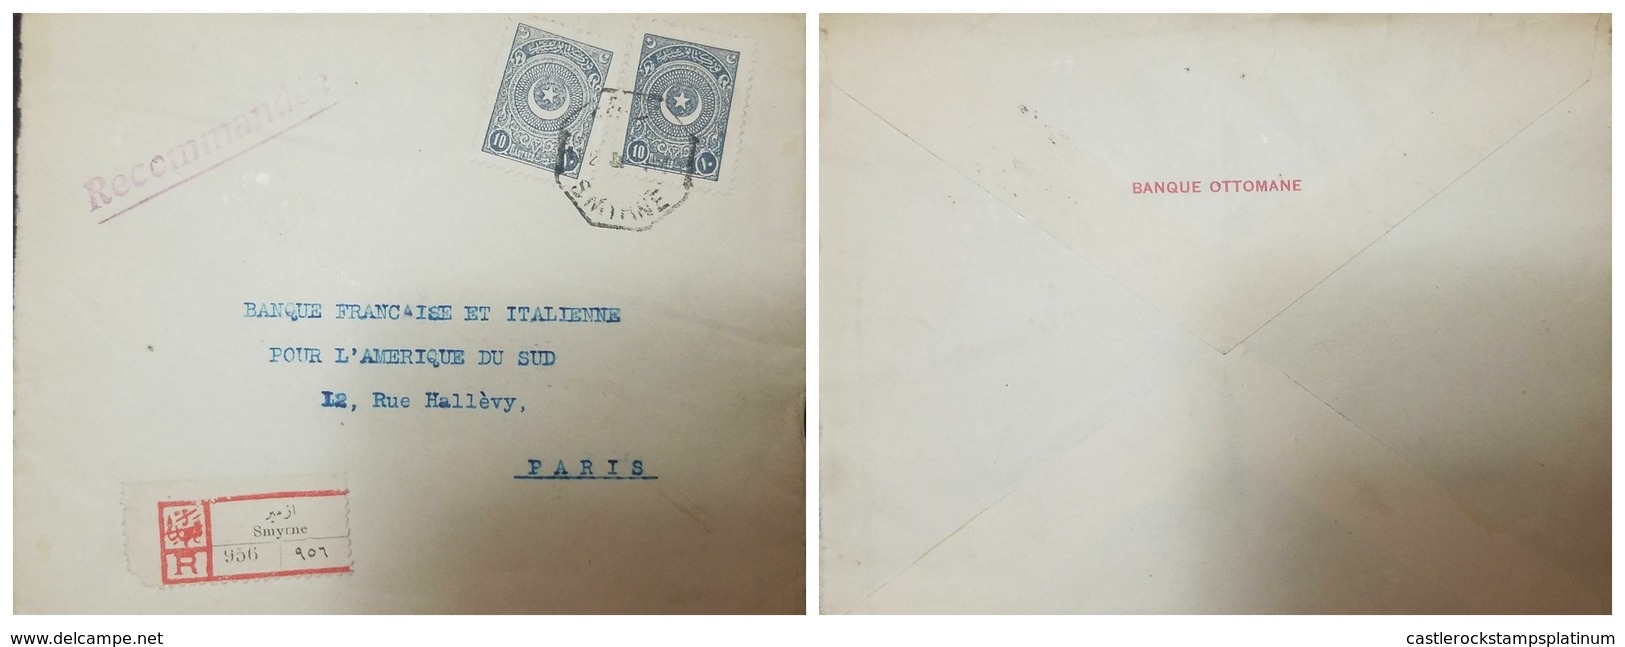 O) 1923 TURKEY, CRESCENT AND STAR-SYMBOLS OF TURKISH CALIPHATE SCT 605 10pa, REGISTERED FROM SMYRNE-BANQUE OTTOMANE-​REC - Covers & Documents